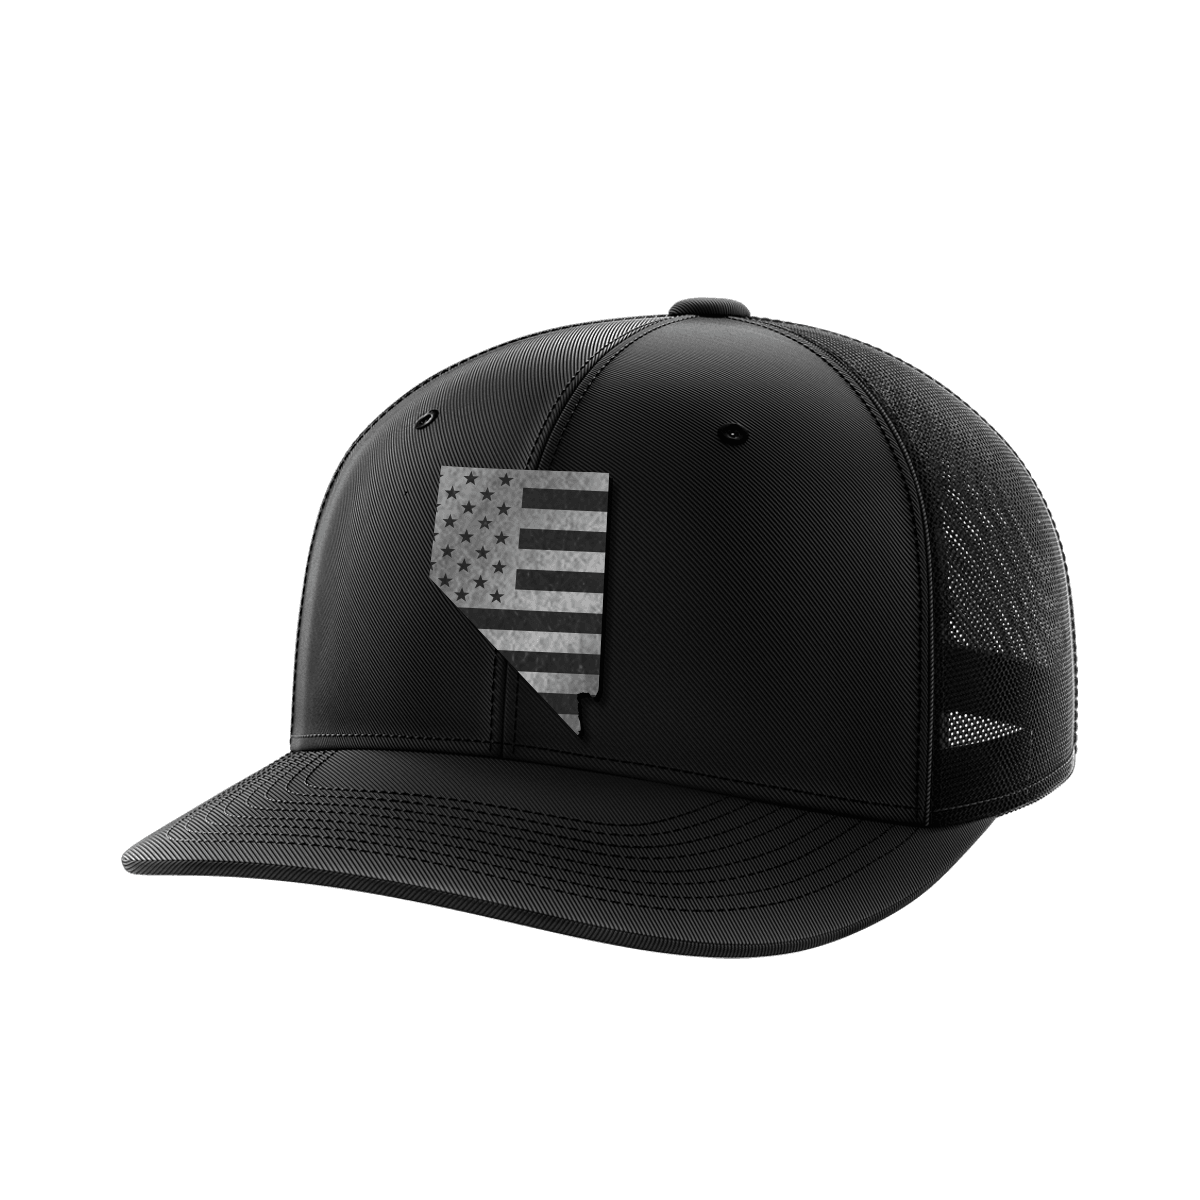 Nevada United Collection (black leather) - Greater Half